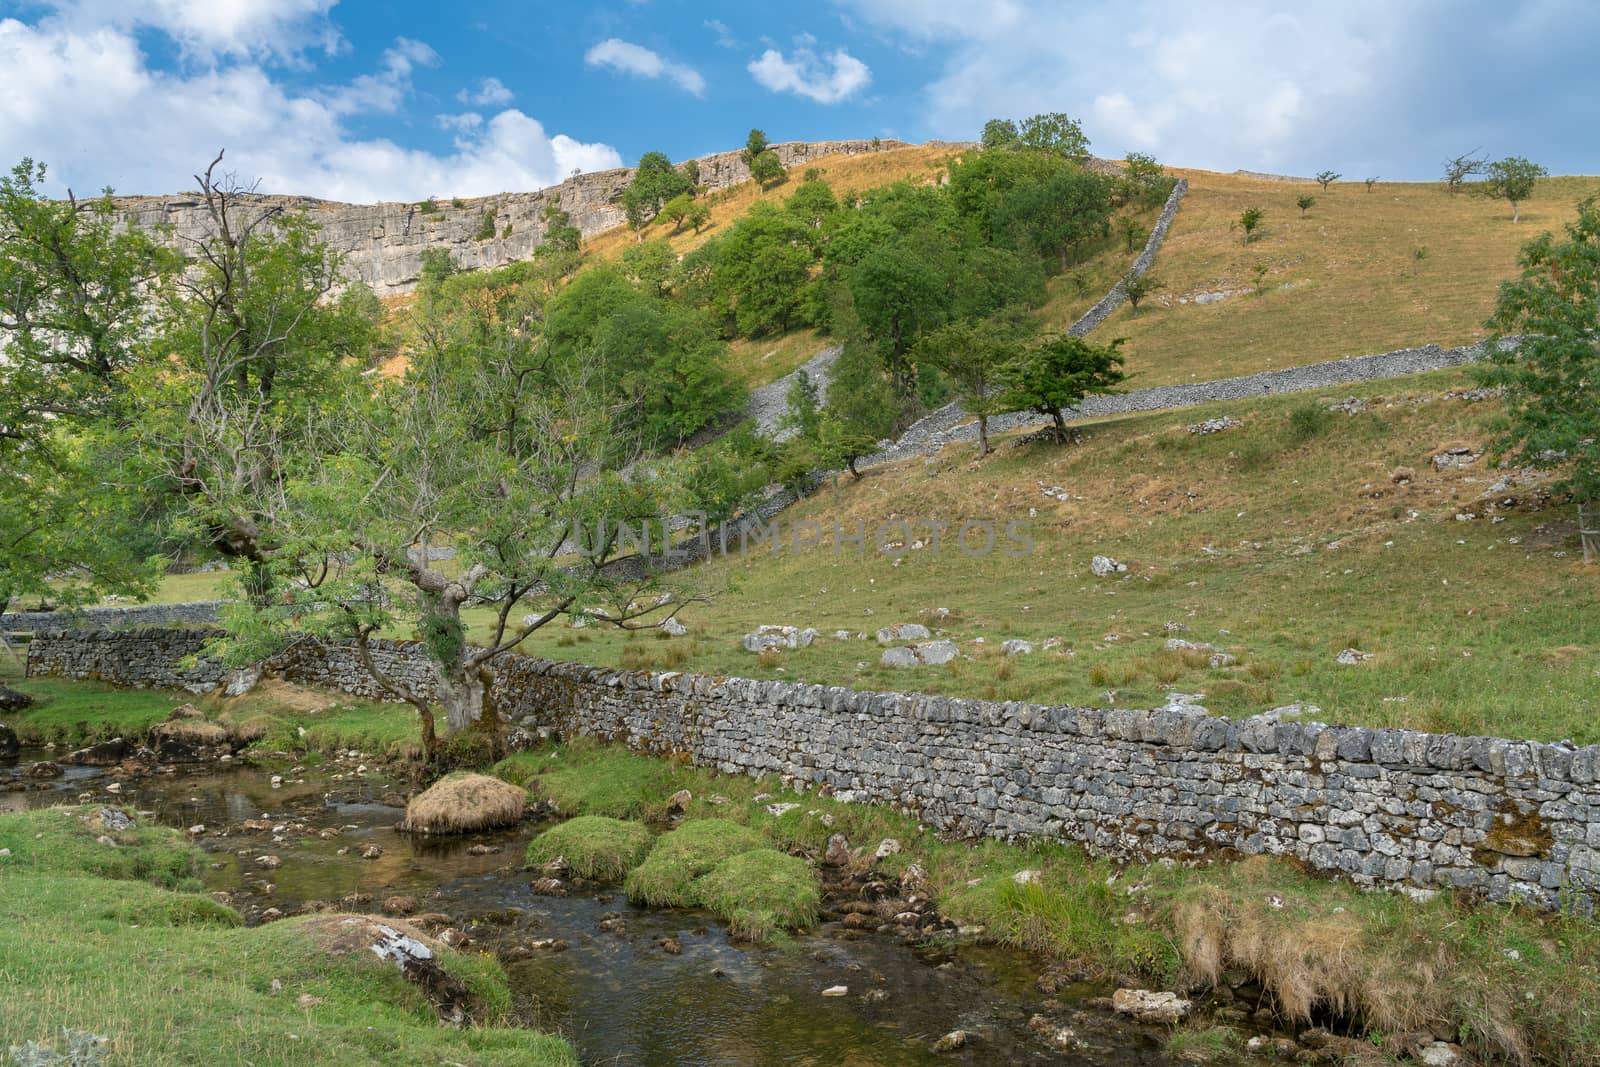 View of the countryside around Malham Cove in the Yorkshire Dale by phil_bird